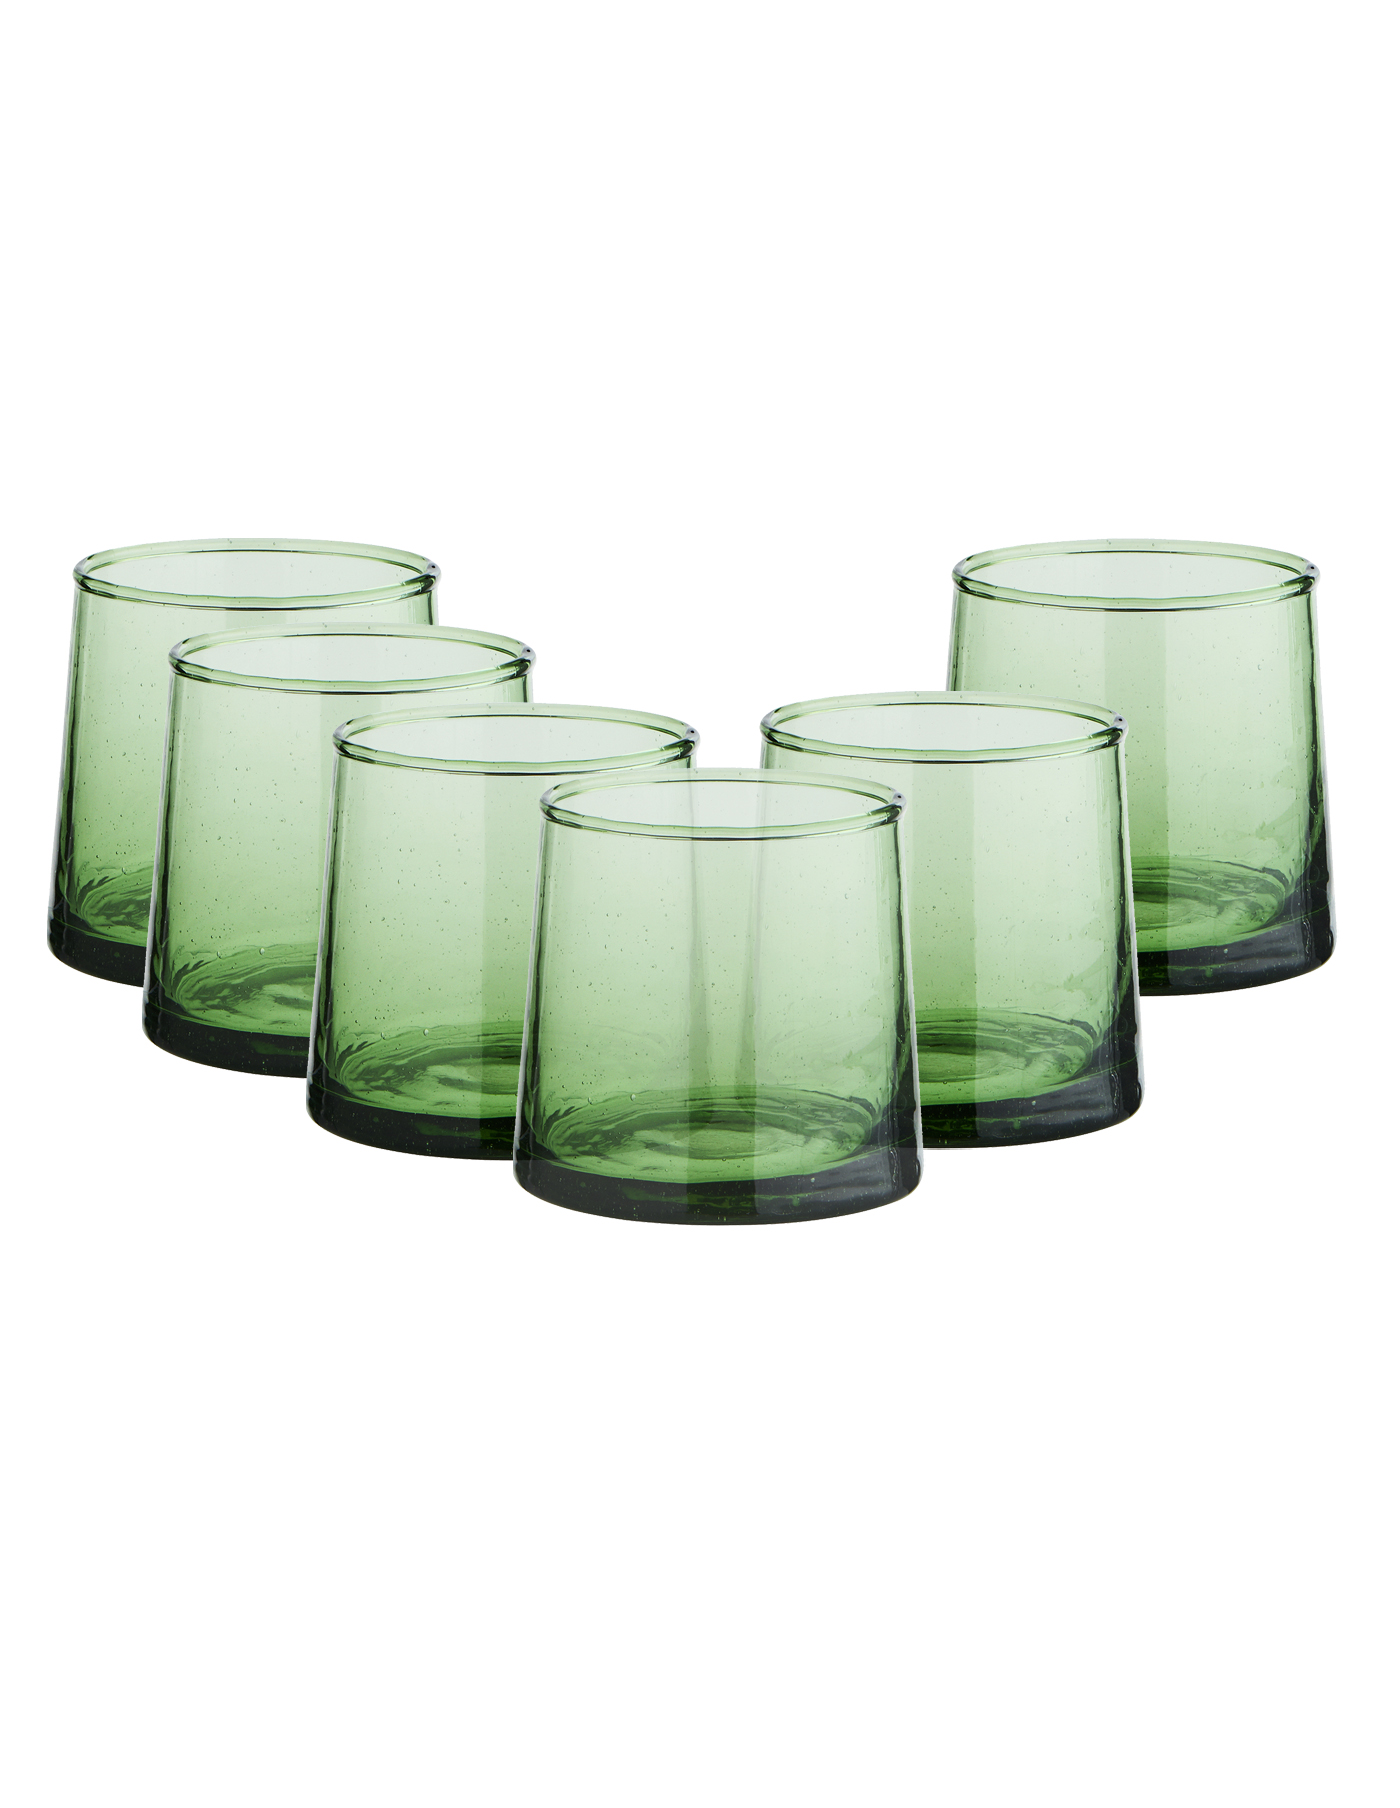 Le verre Beldi Set of 6 Green Low Recycled Moroccan Beldi Glasses